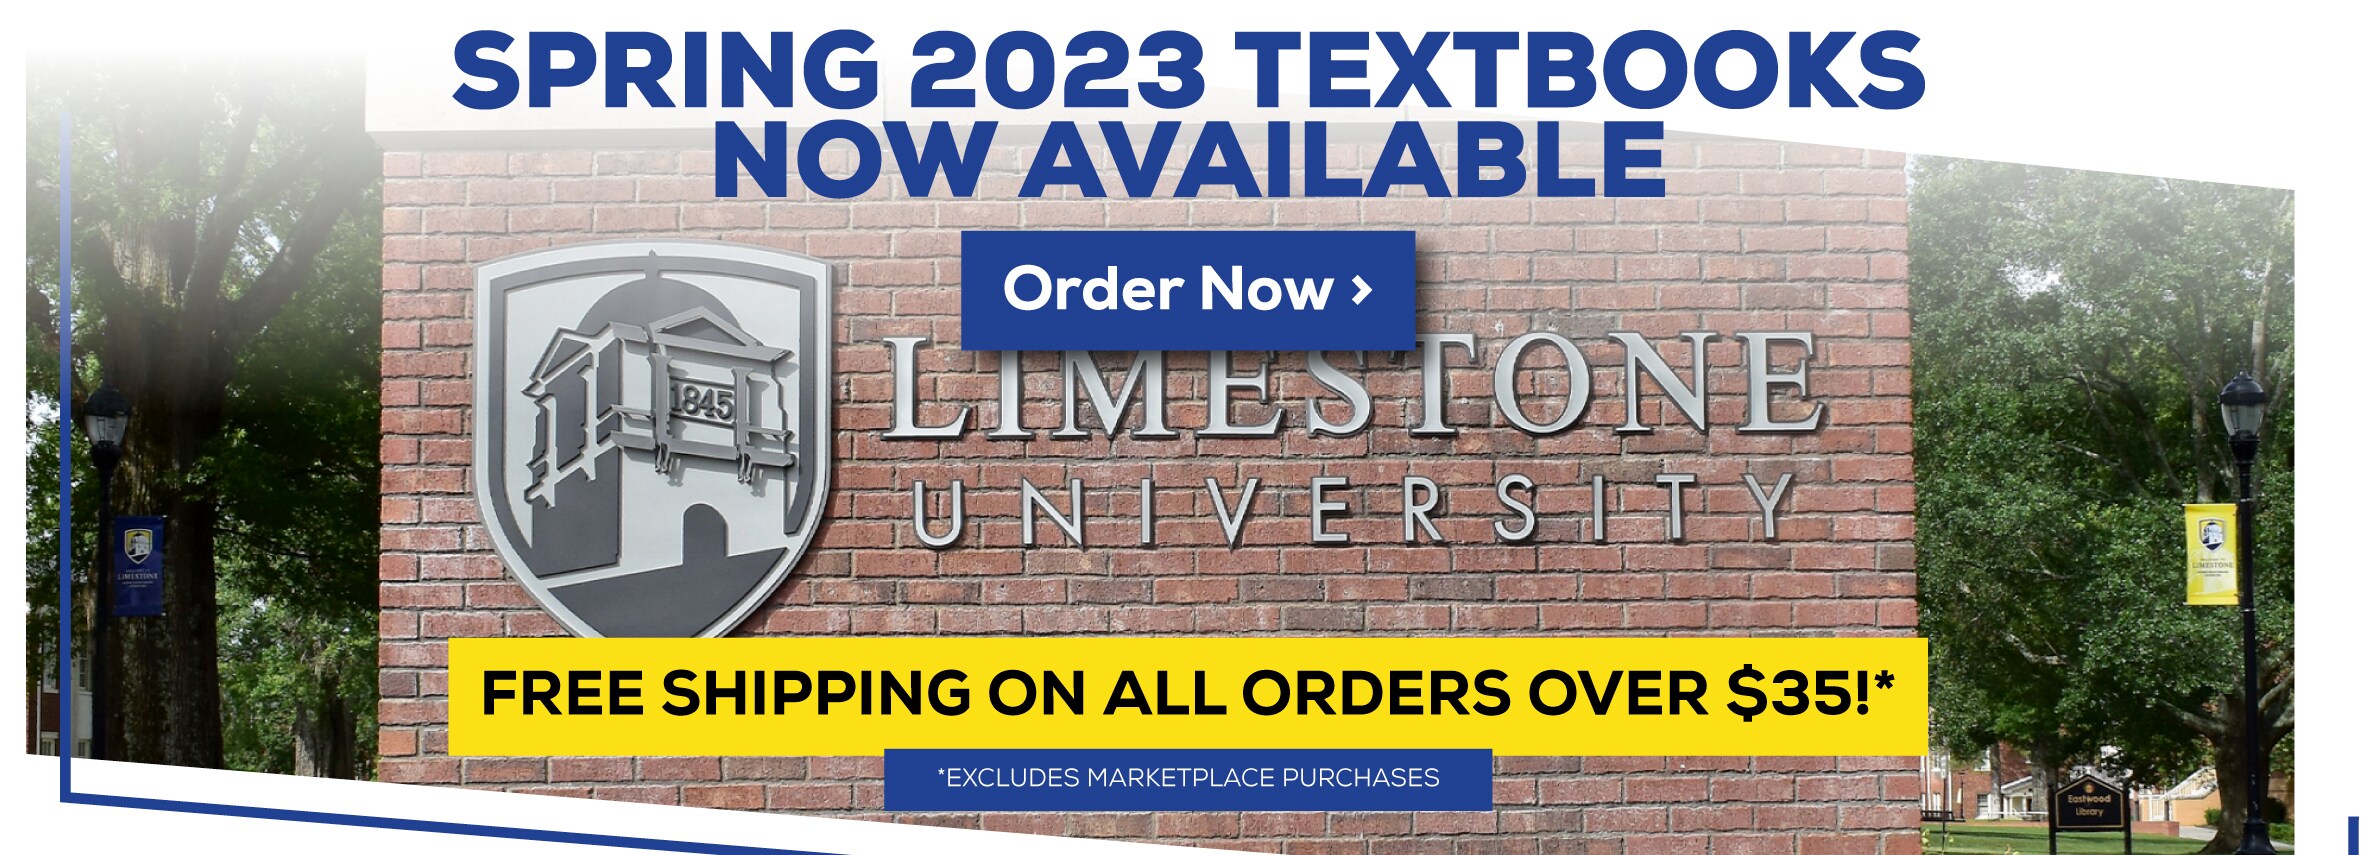 Spring 2023 Textbooks Now Available. Order Now. Free shipping on all orders over $35.* Excludes Marketplace Purchases.